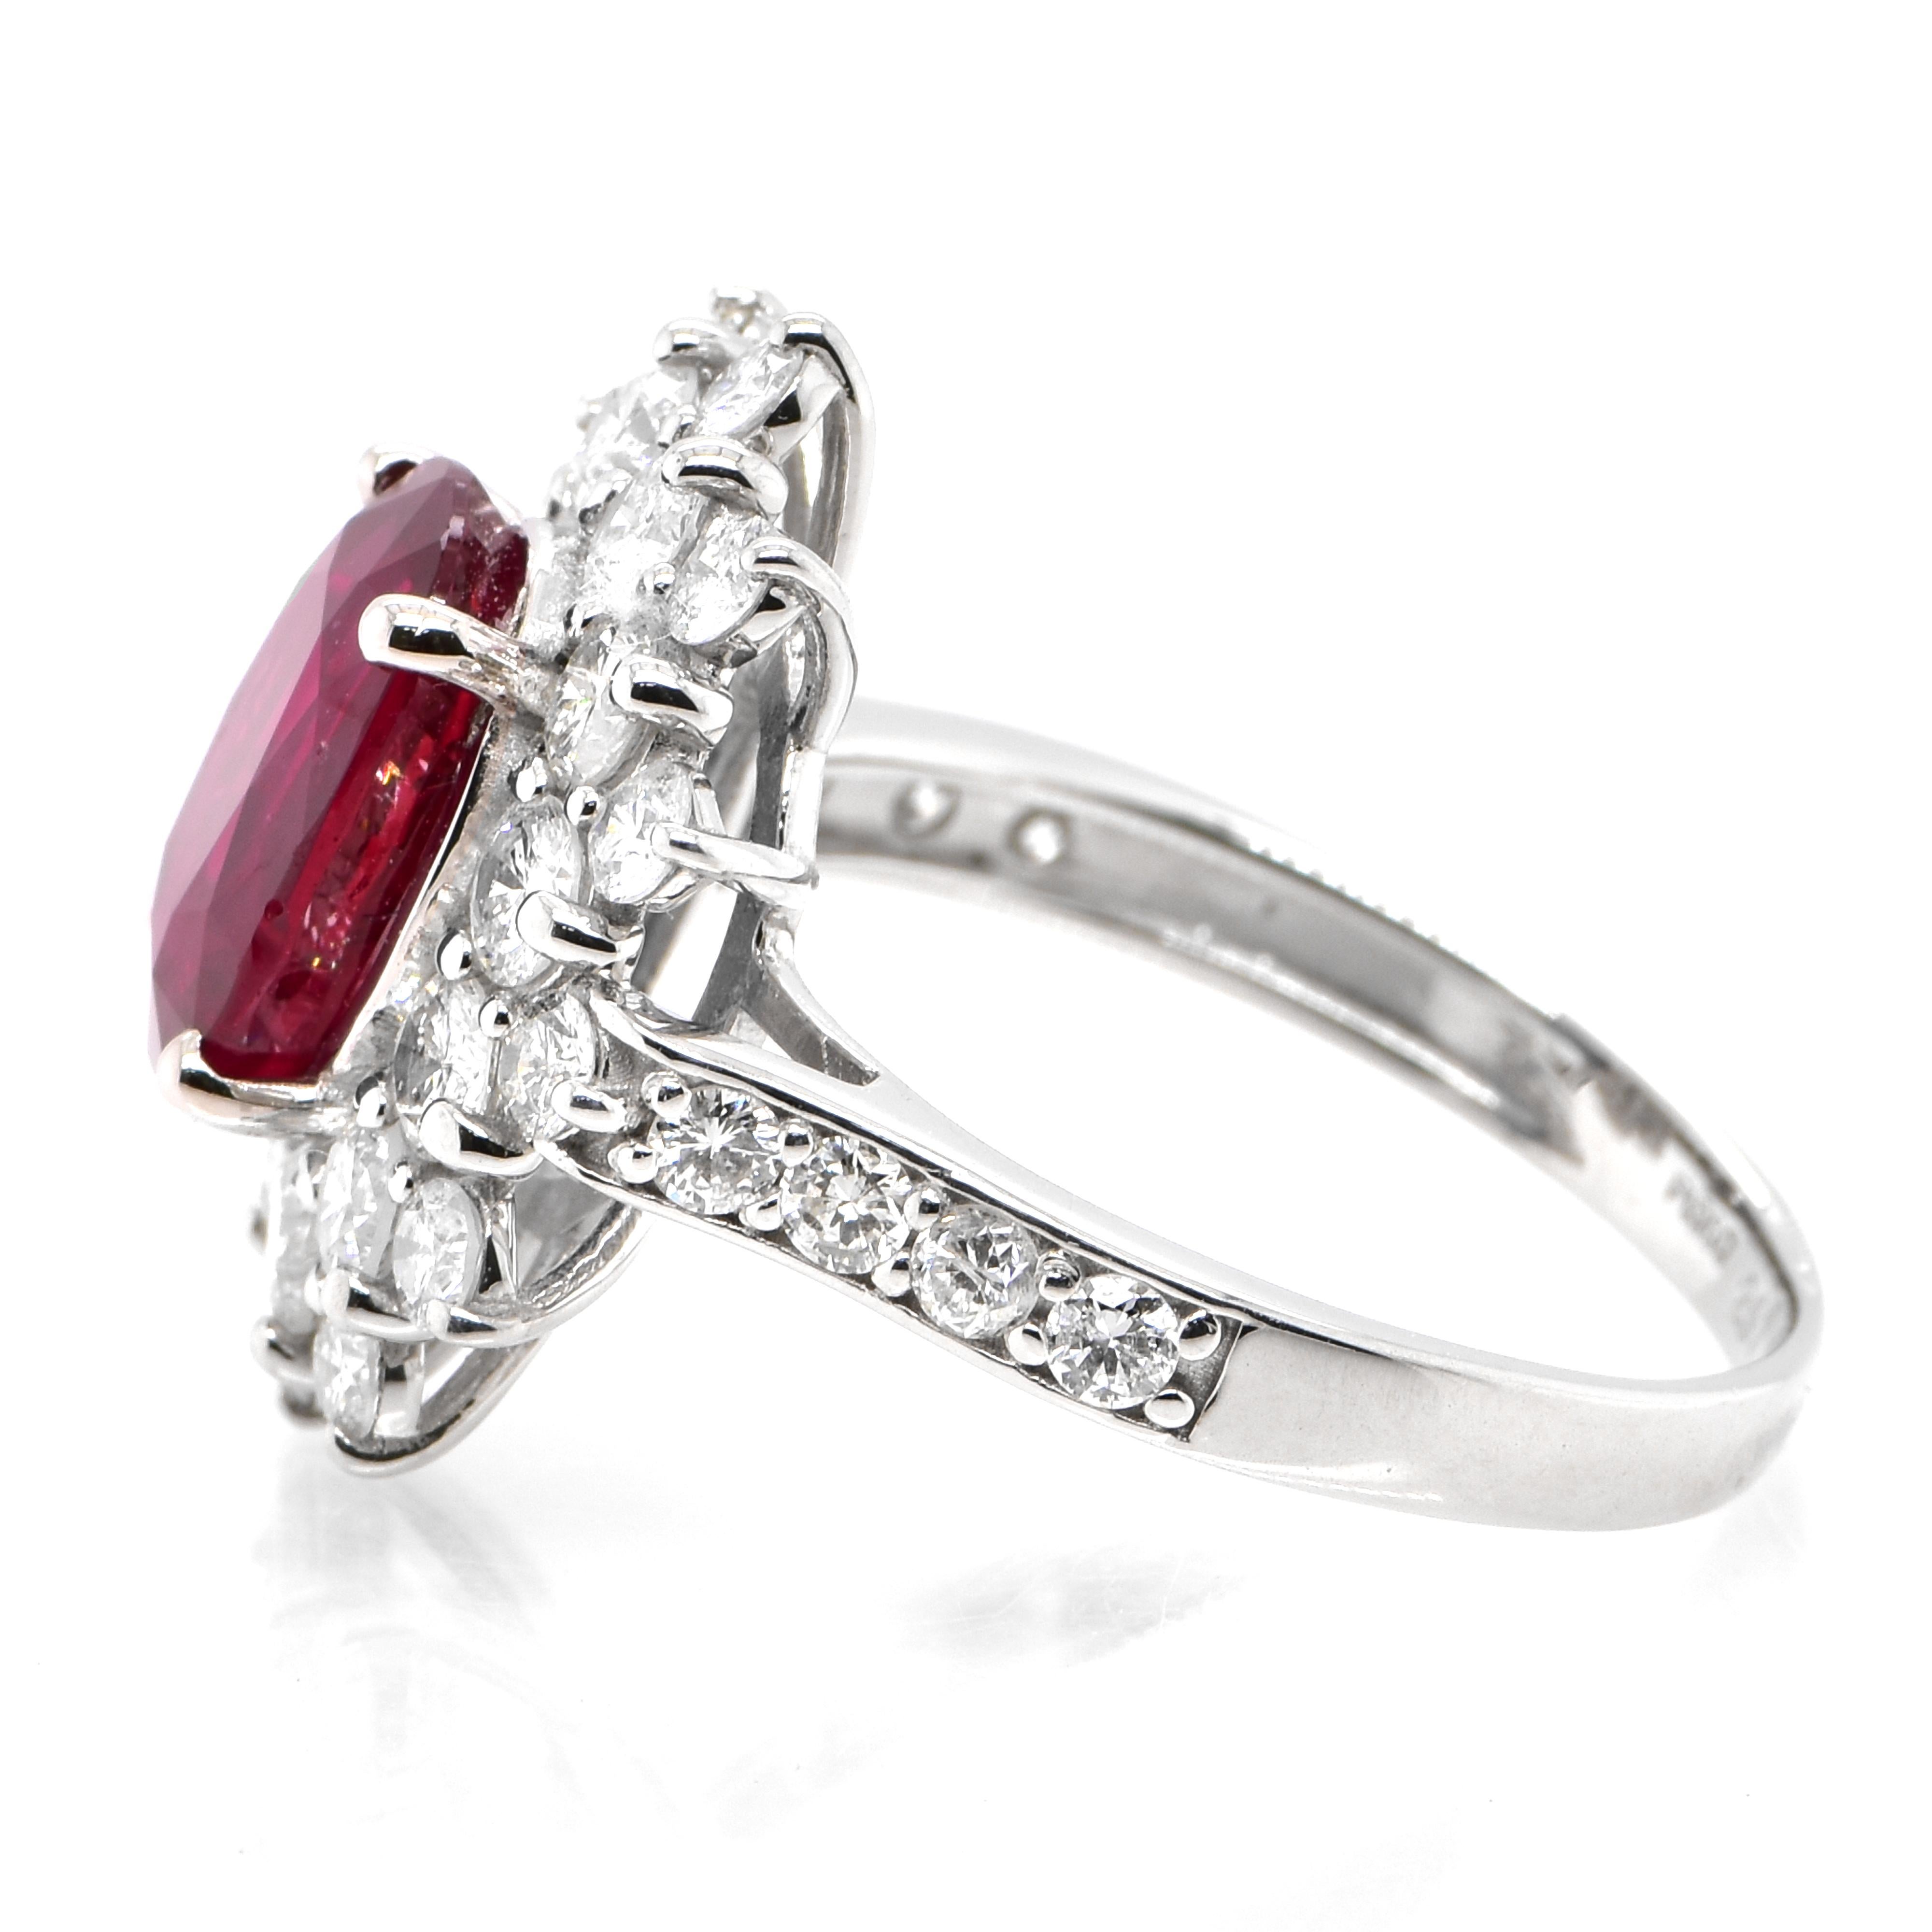 Oval Cut GIA Certified 2.97 Carat Siam Ruby and Diamond Ring Made in Platinum For Sale